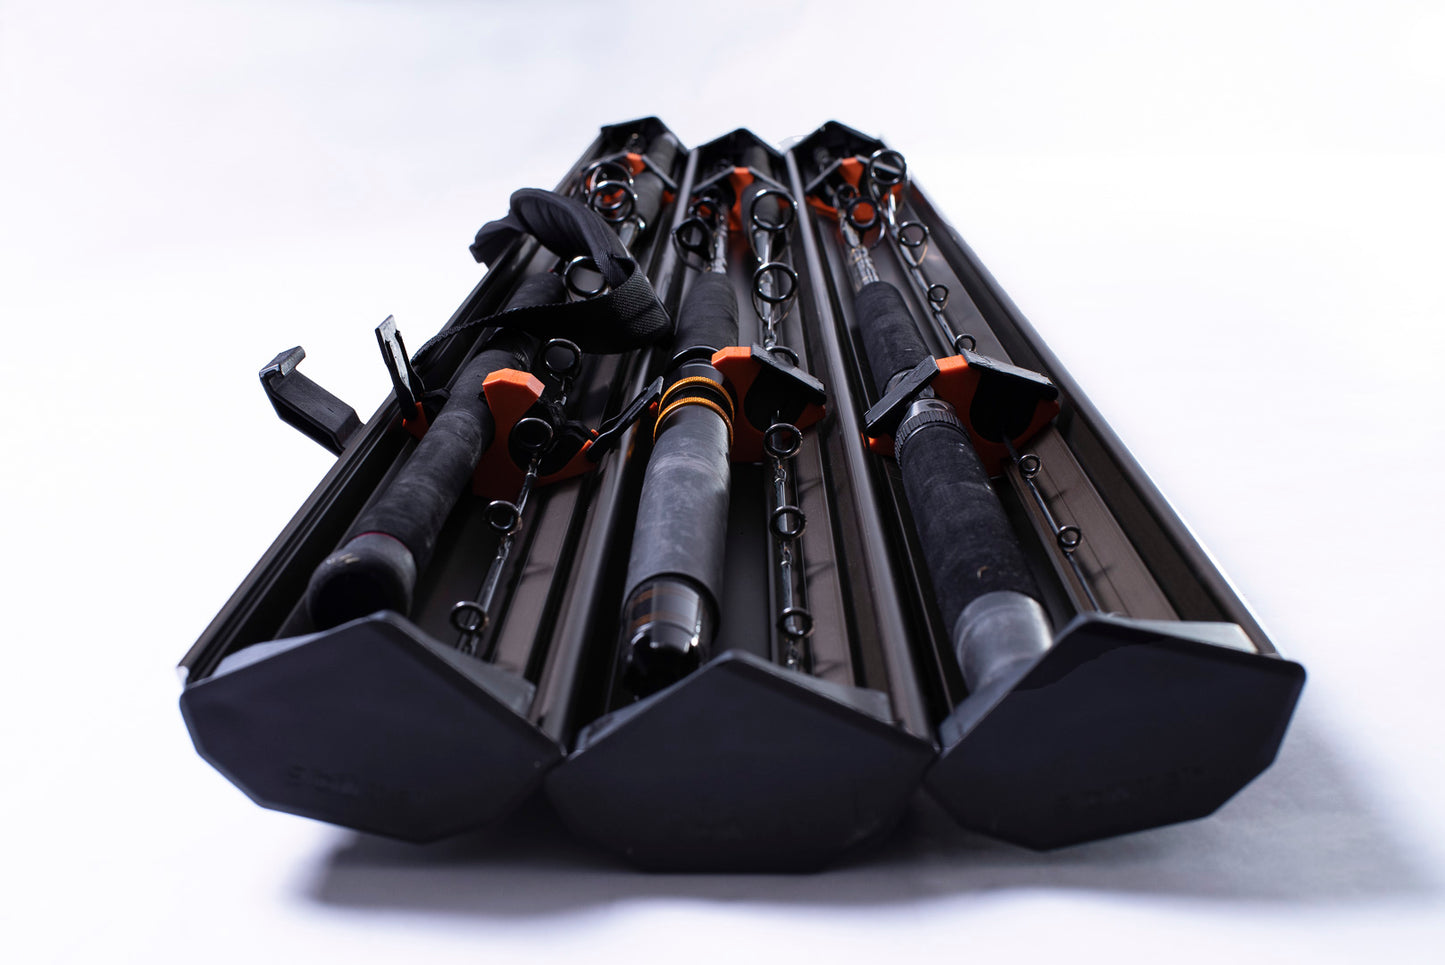 scute fishing rod case storage fully open end view